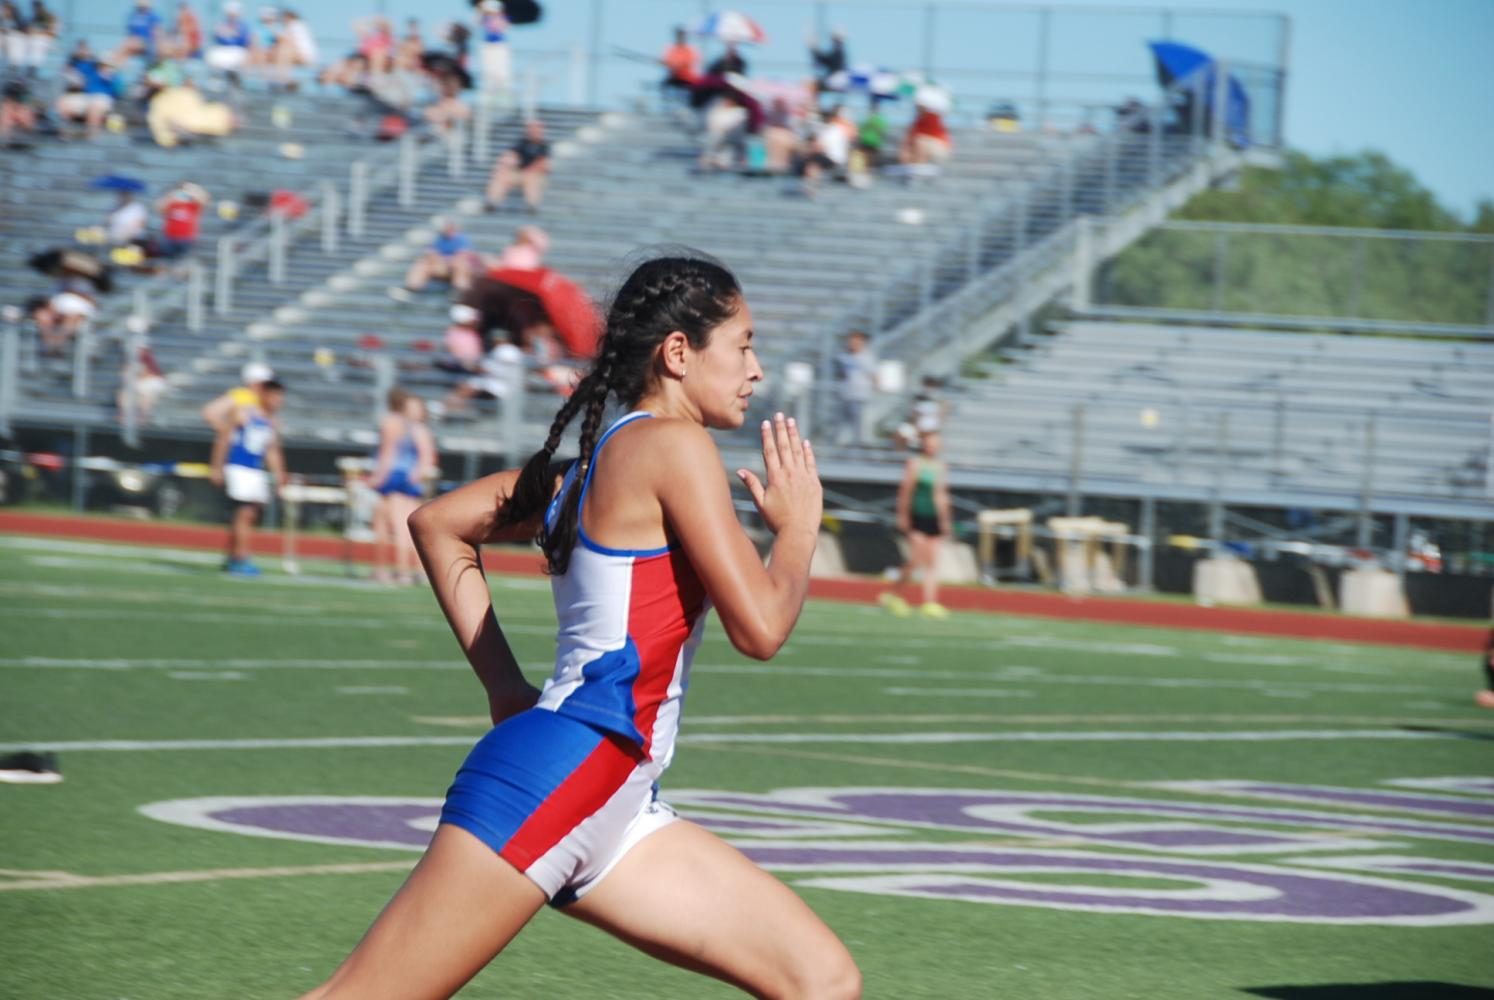 Roca running the 400 meter dash. She has been running track since the seventh grade.